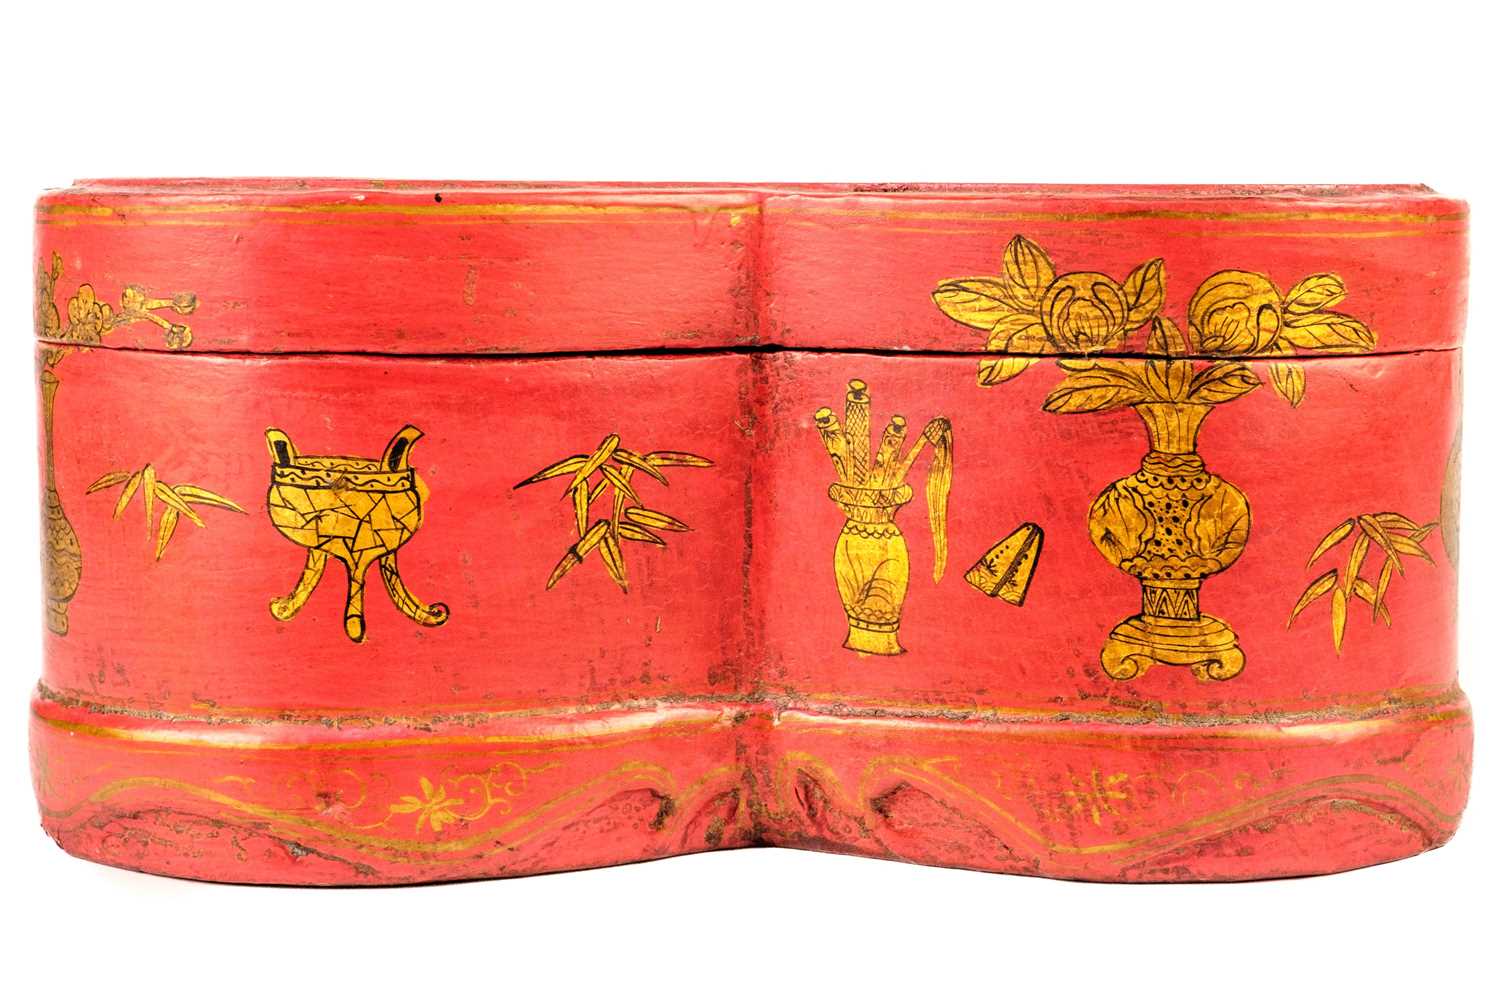 A pair of Chinese red lacquer boxes, 20th century. - Image 10 of 11